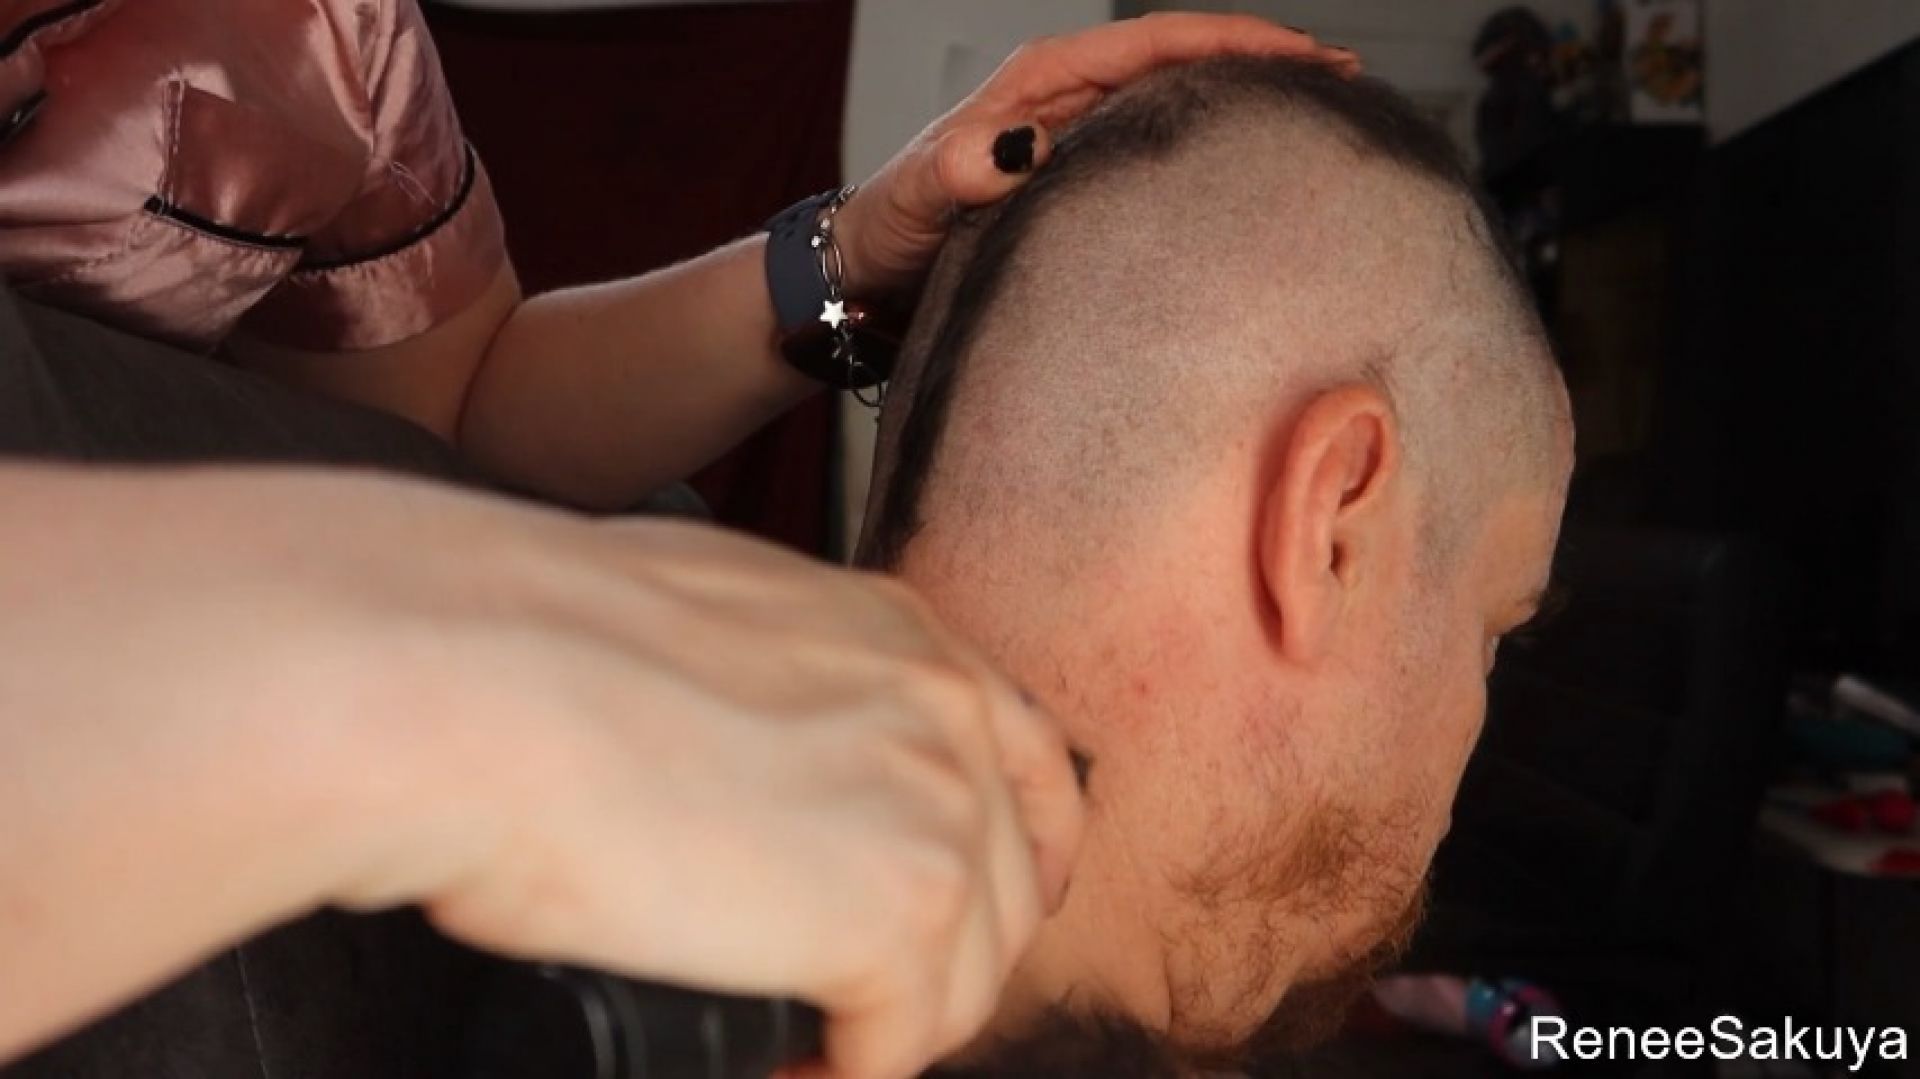 Shaving his head from multiple angles upclose